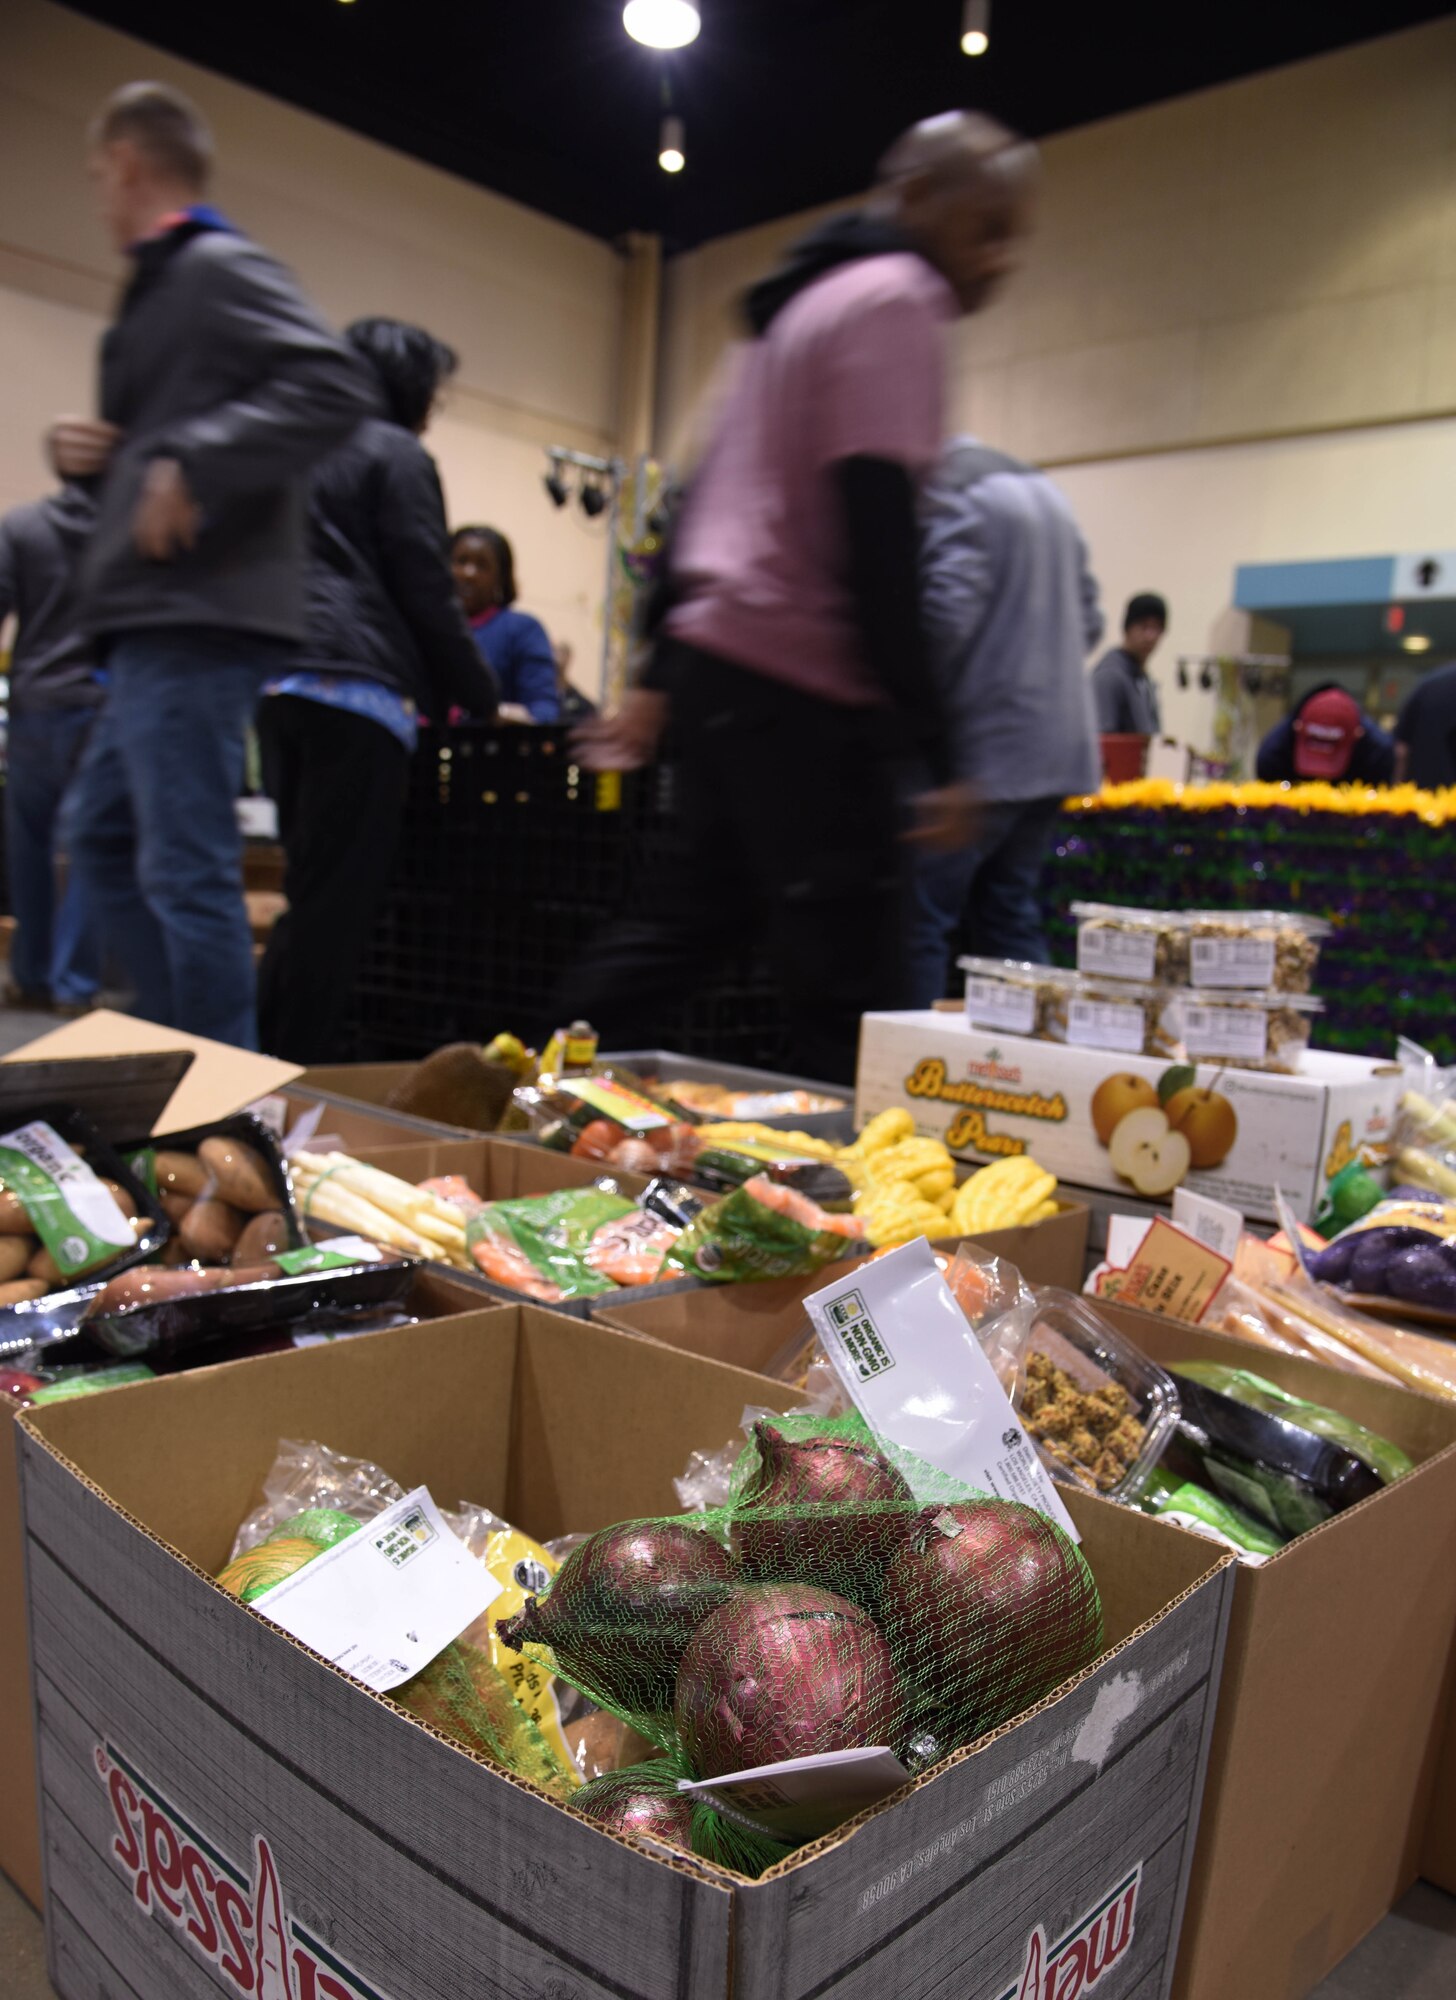 Food items sit in boxes during a food drive at the Mississippi Coast Coliseum and Convention Center Jan. 16, 2018, Biloxi, Mississippi. More than 80 Airmen participated in the wing-level community sponsored volunteer event packaging over 21,000 pounds of food, equating to approximately 17,500 meals that will be provided to hunger relief. (U.S. Air Force photo by Kemberly Groue)